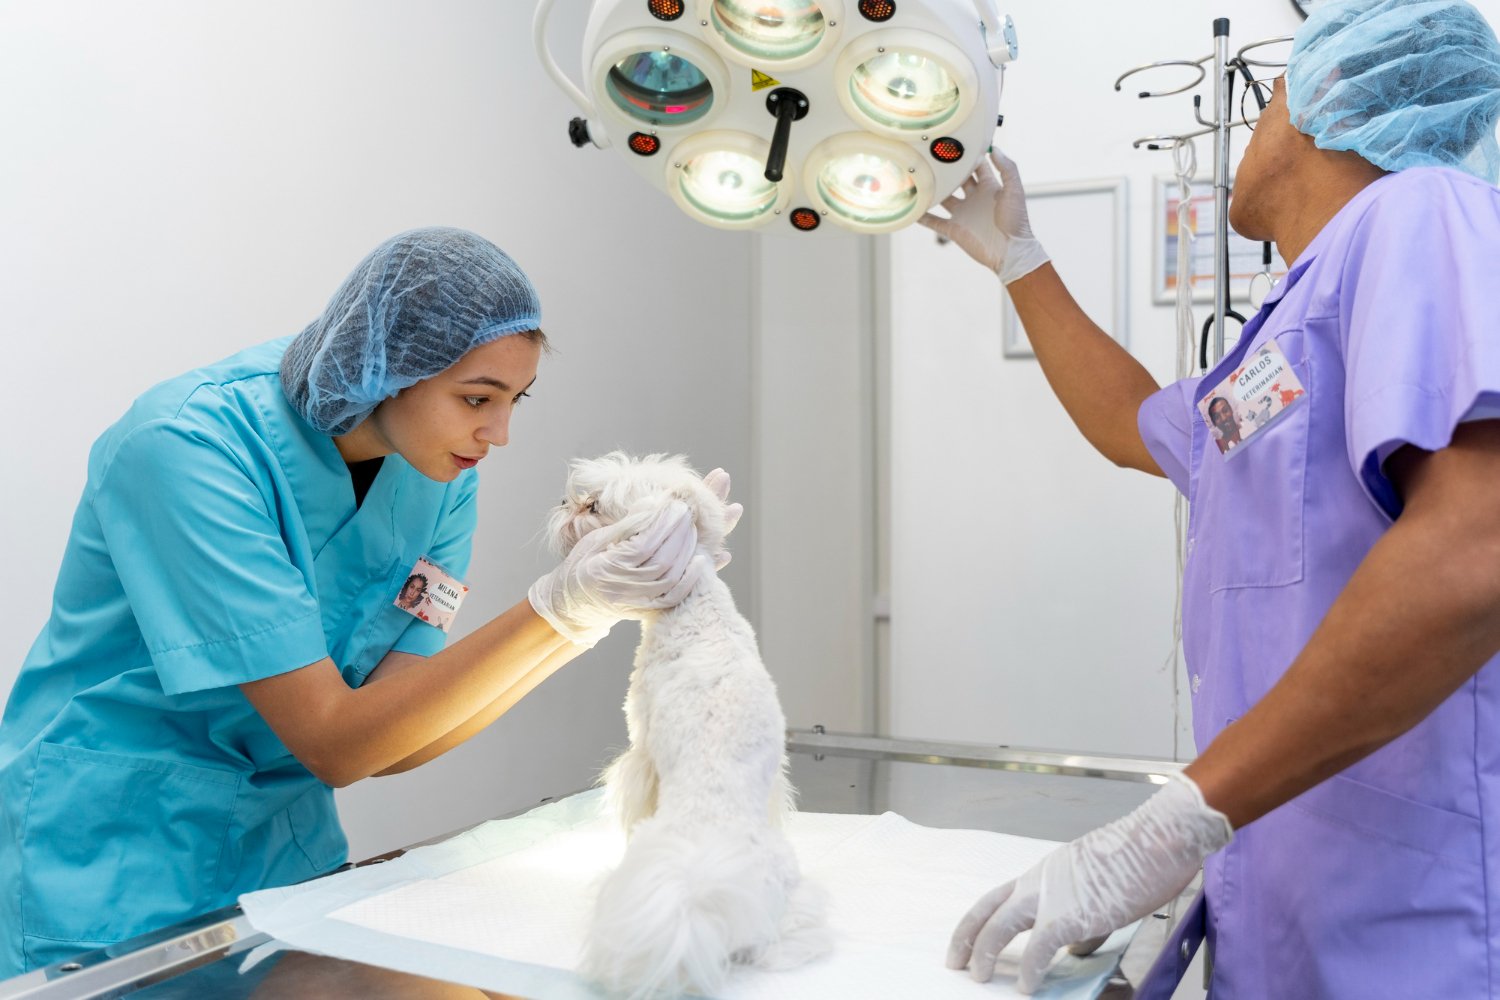 Ranking of Top Animal Surgeries for Maximum Growth